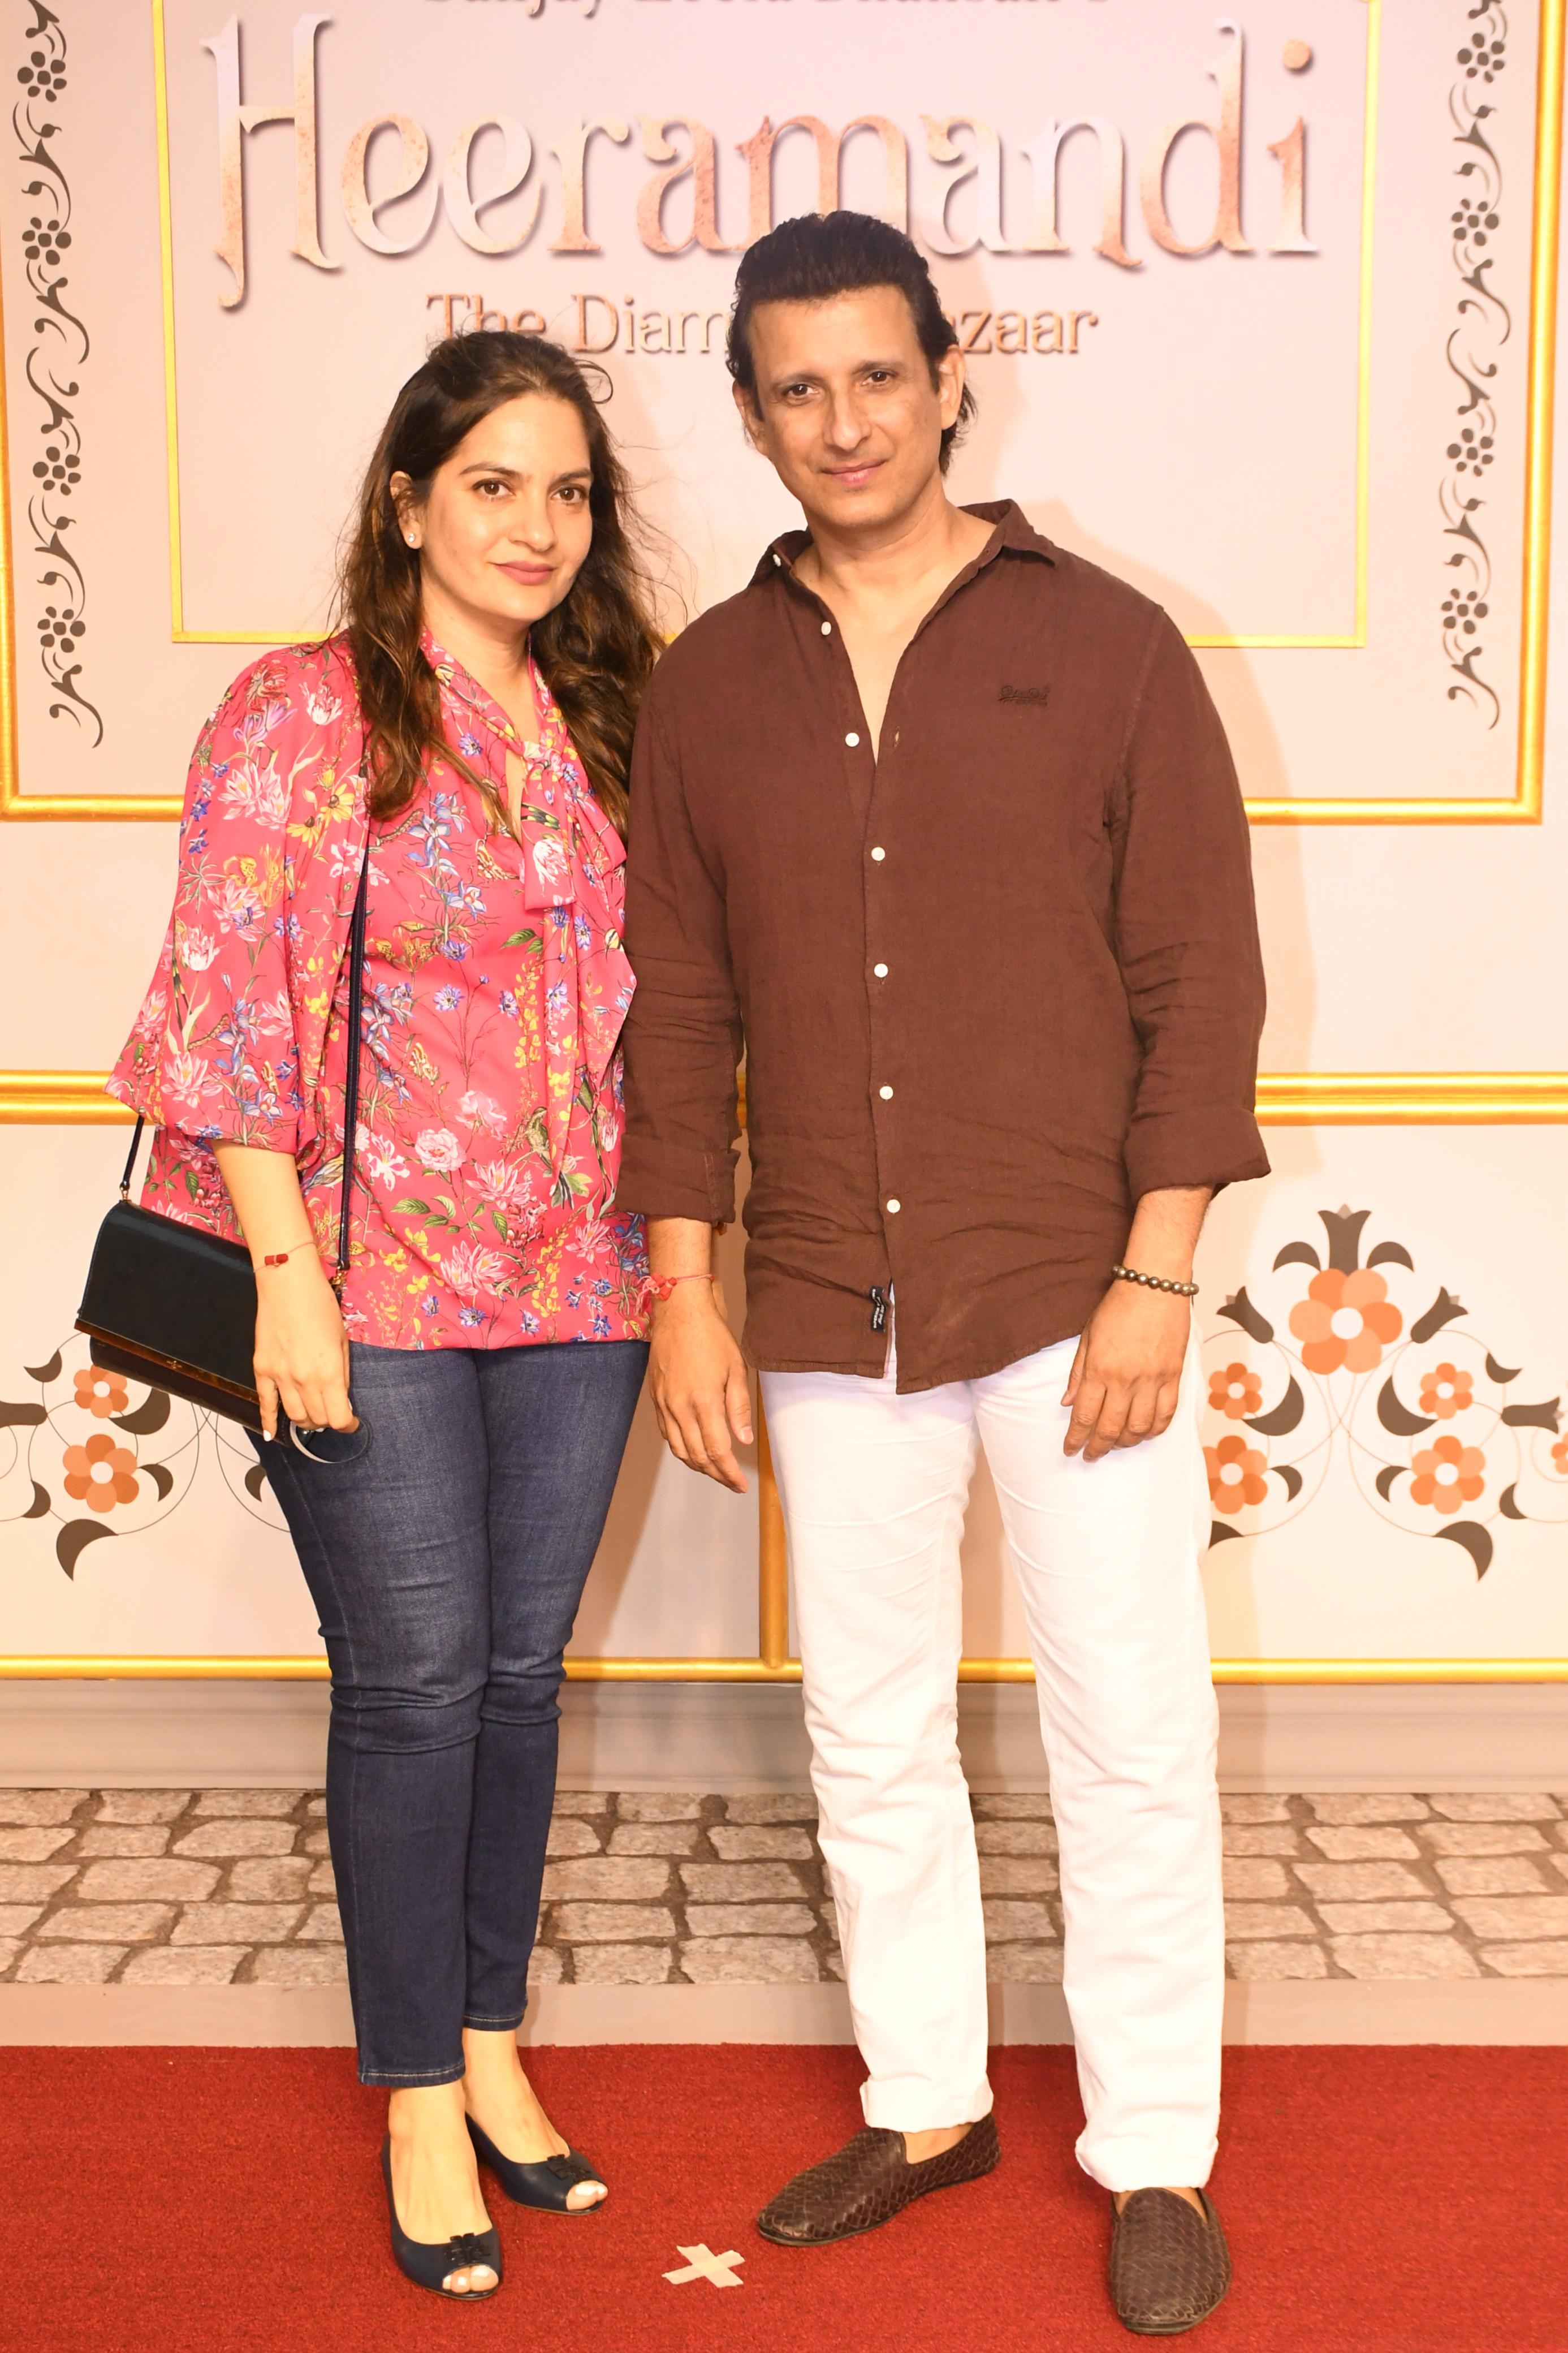 Sharman Joshi was spotted with his other half Prerna Chopra on the red carpet